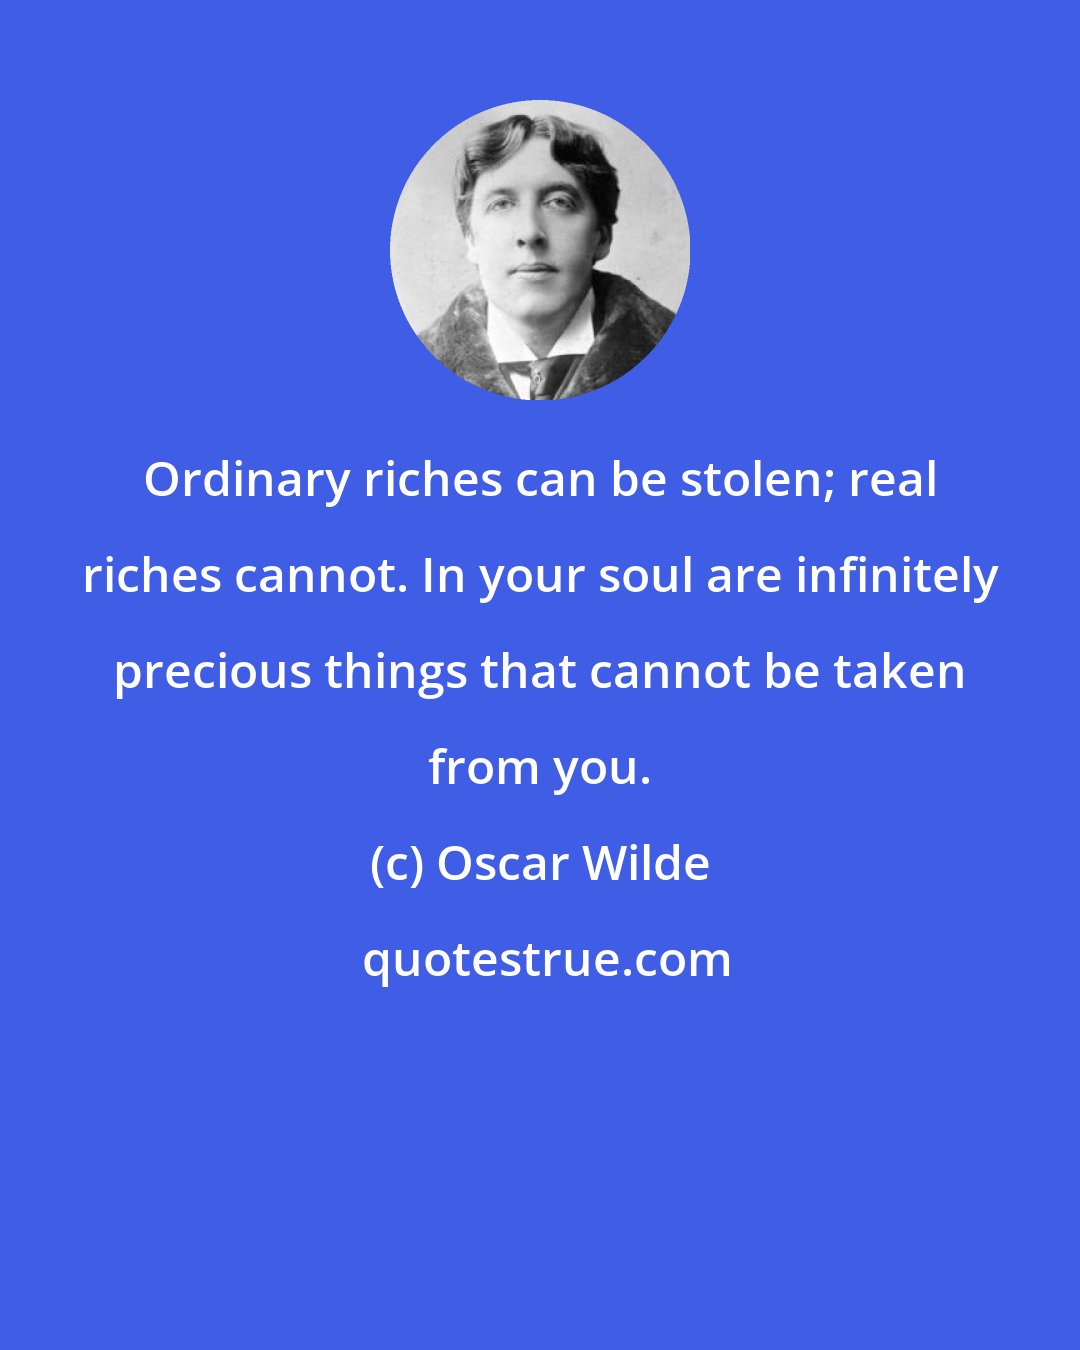 Oscar Wilde: Ordinary riches can be stolen; real riches cannot. In your soul are infinitely precious things that cannot be taken from you.